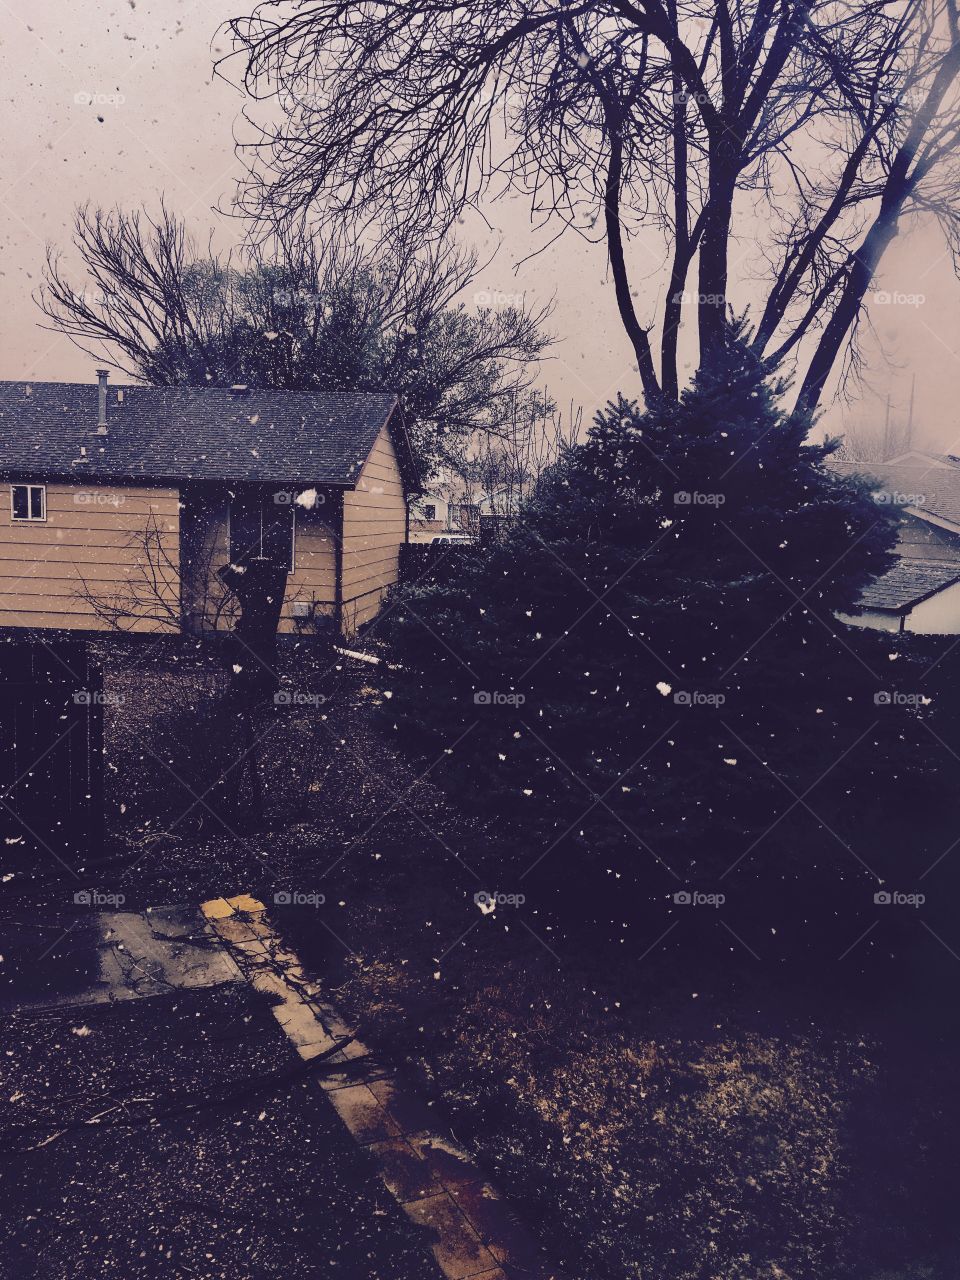 Snowing at my friends house